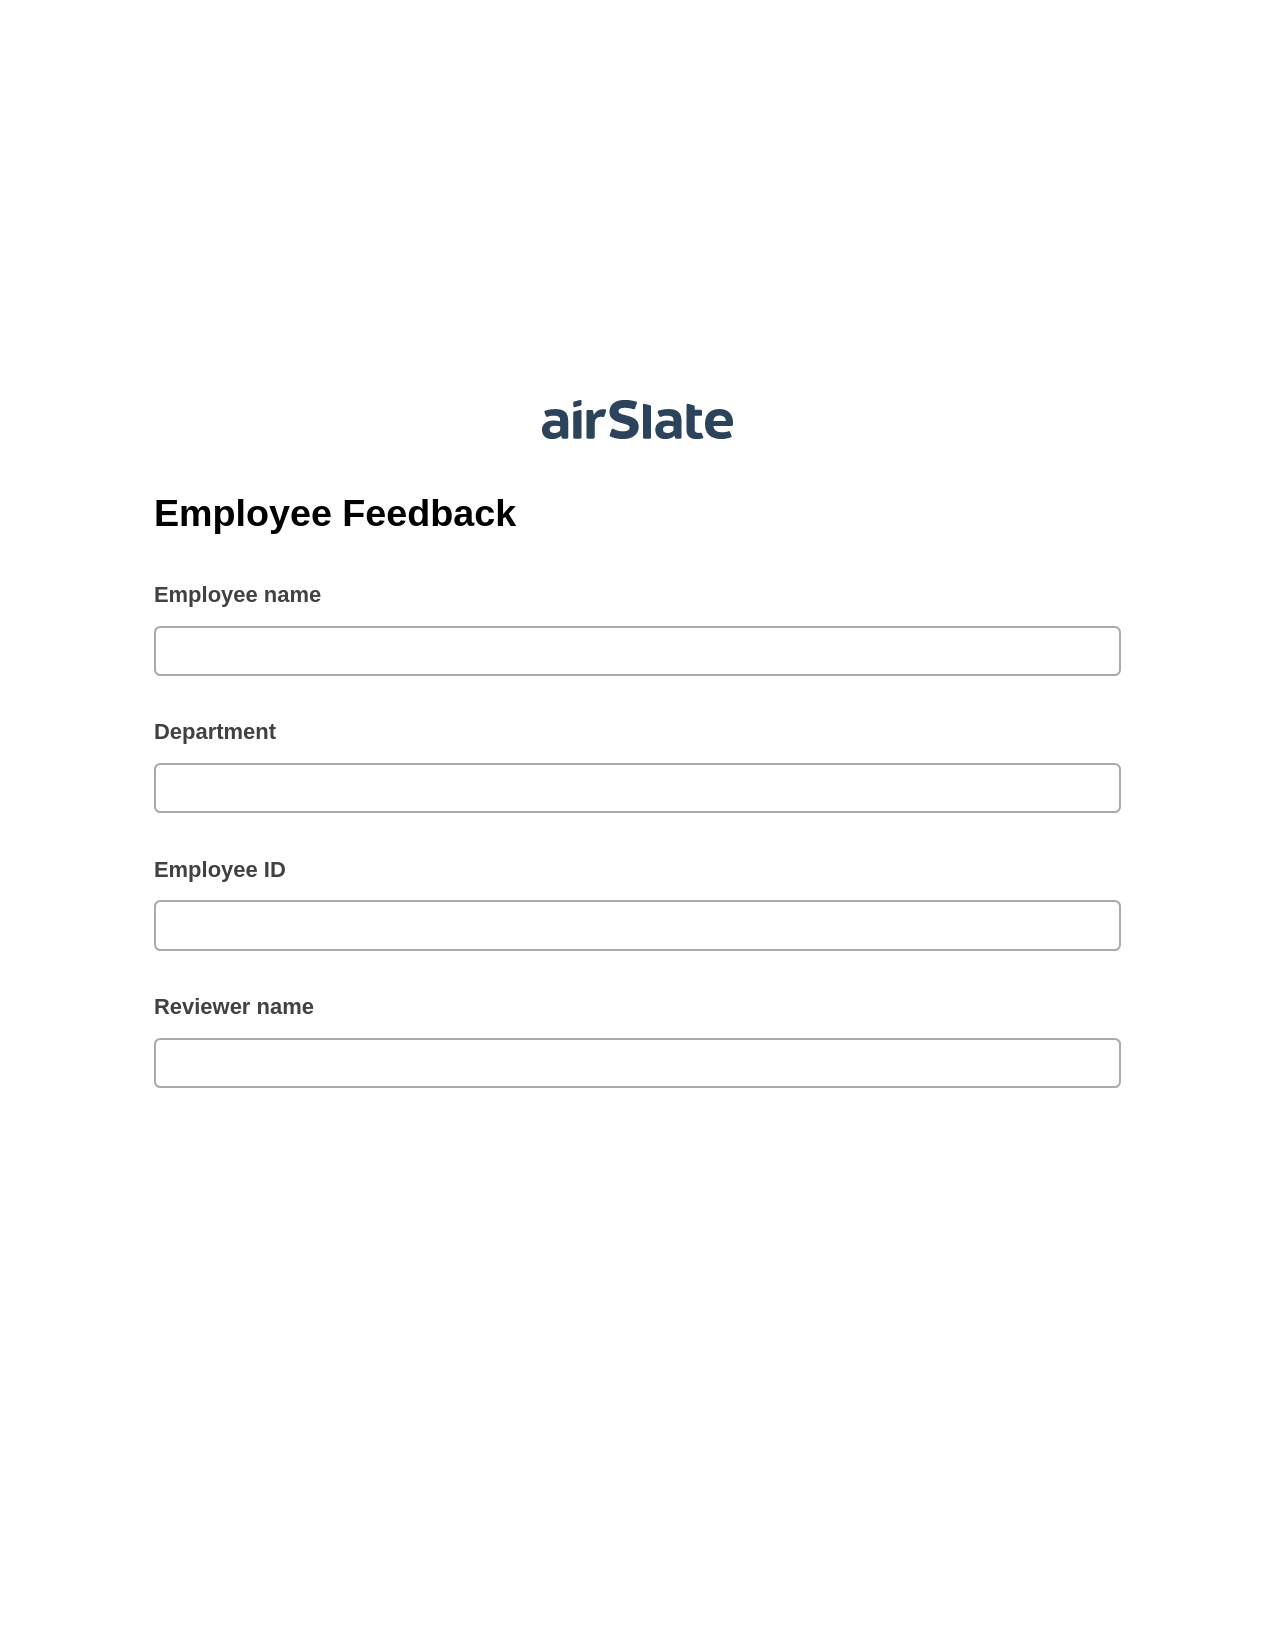 Employee Feedback Pre-fill from CSV File Dropdown Options Bot, Remove Tags From Slate Bot, Export to Excel 365 Bot